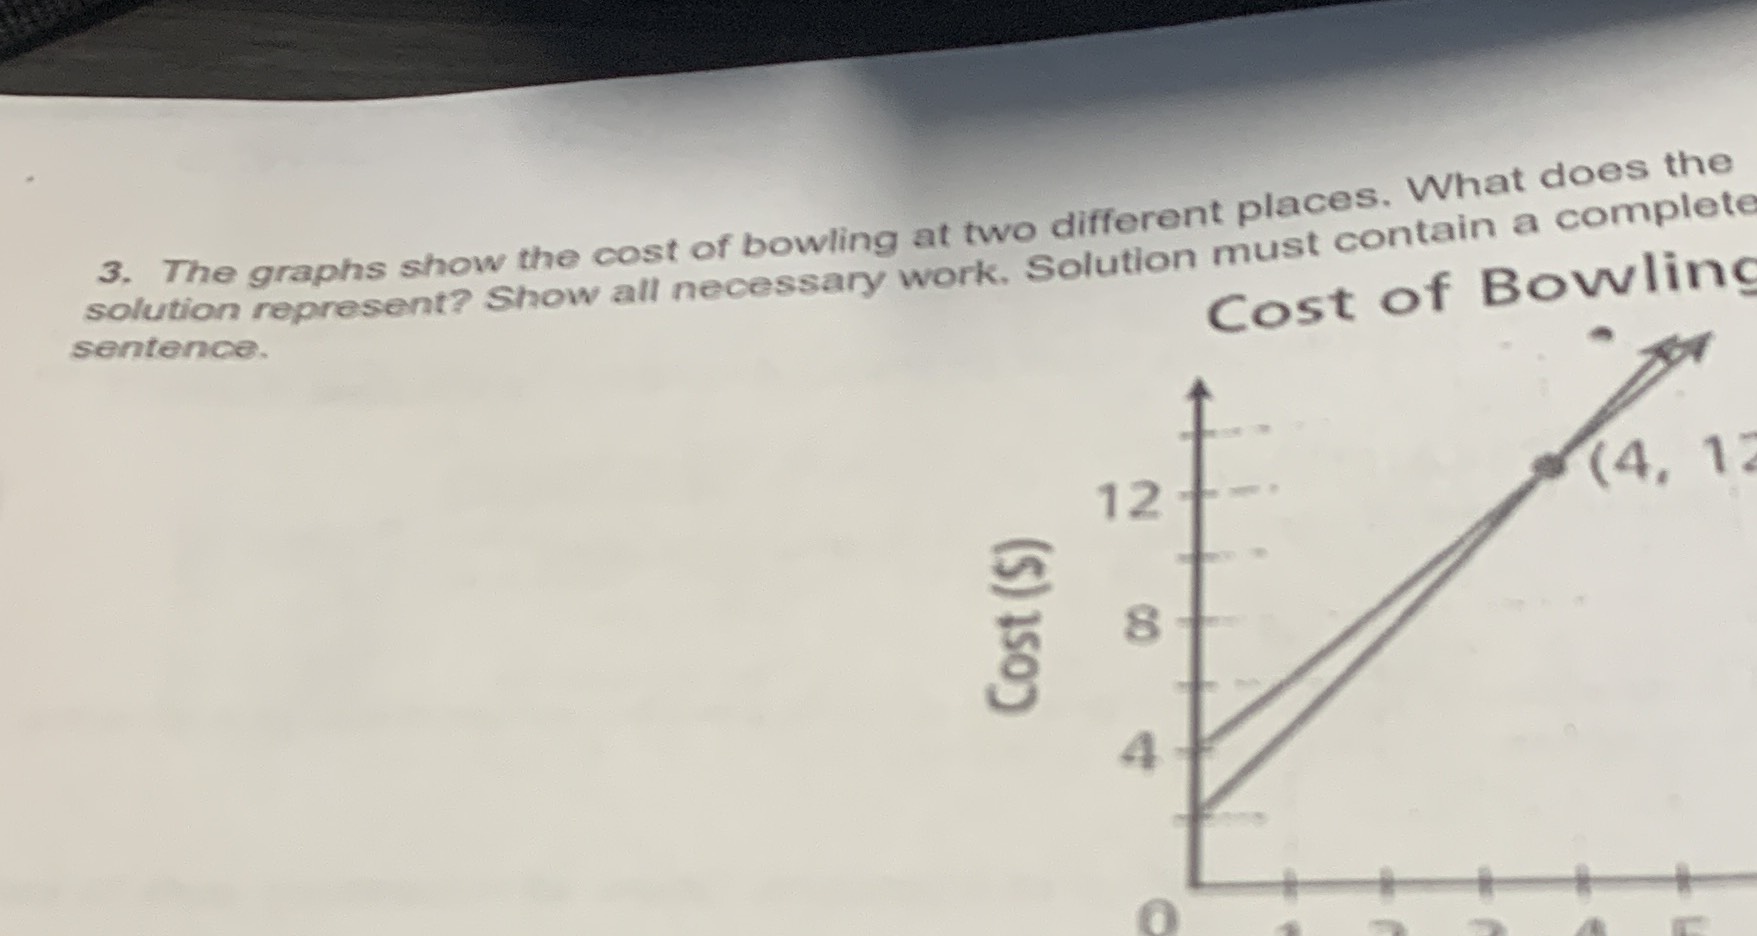 3. The graphs show the cost of bowling at two diff...